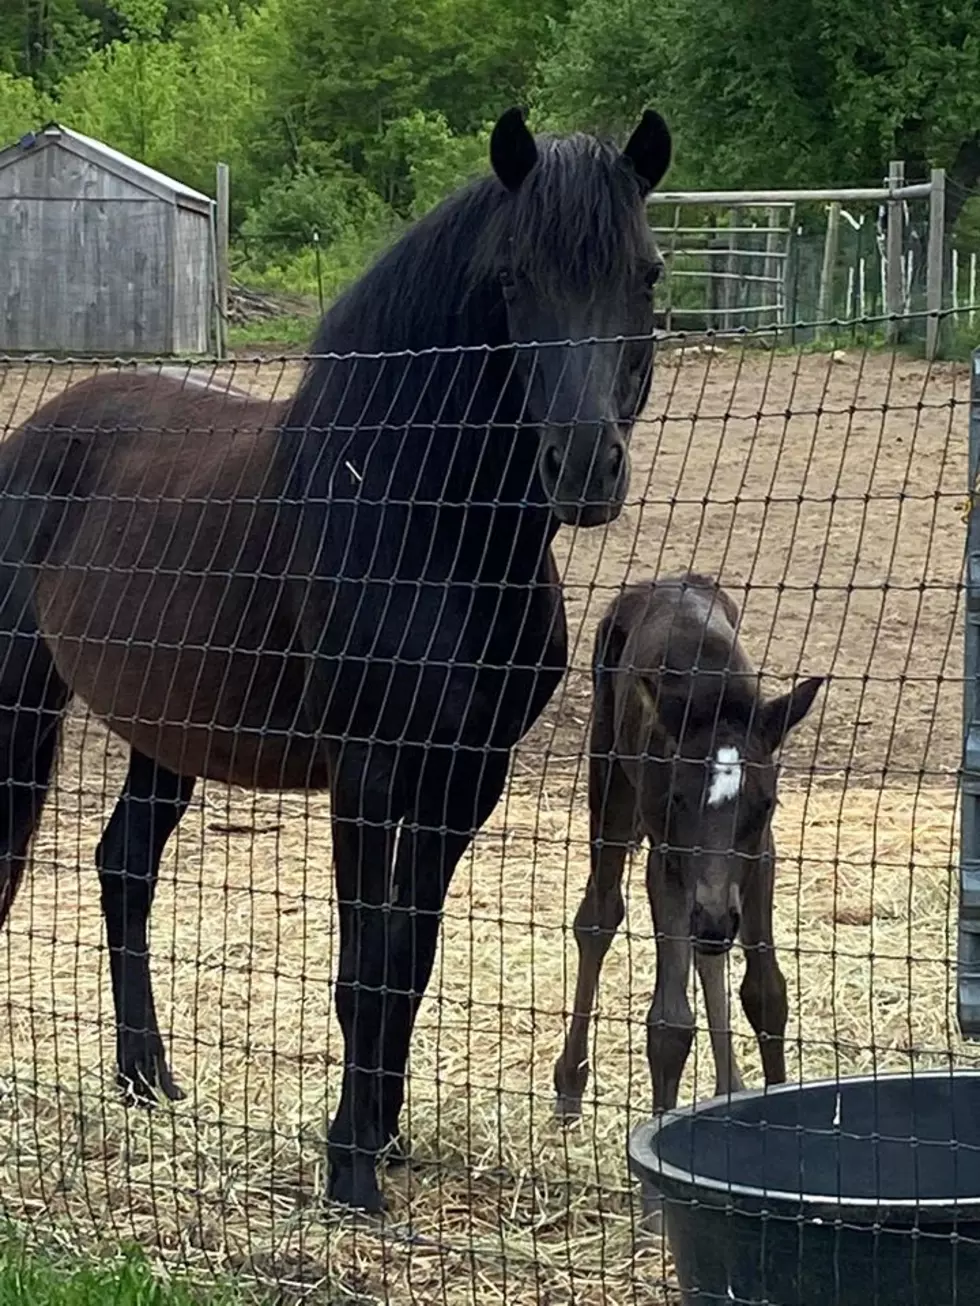 Rare New Pony Born in Jaffrey, NH Has Big Shoes To Fill